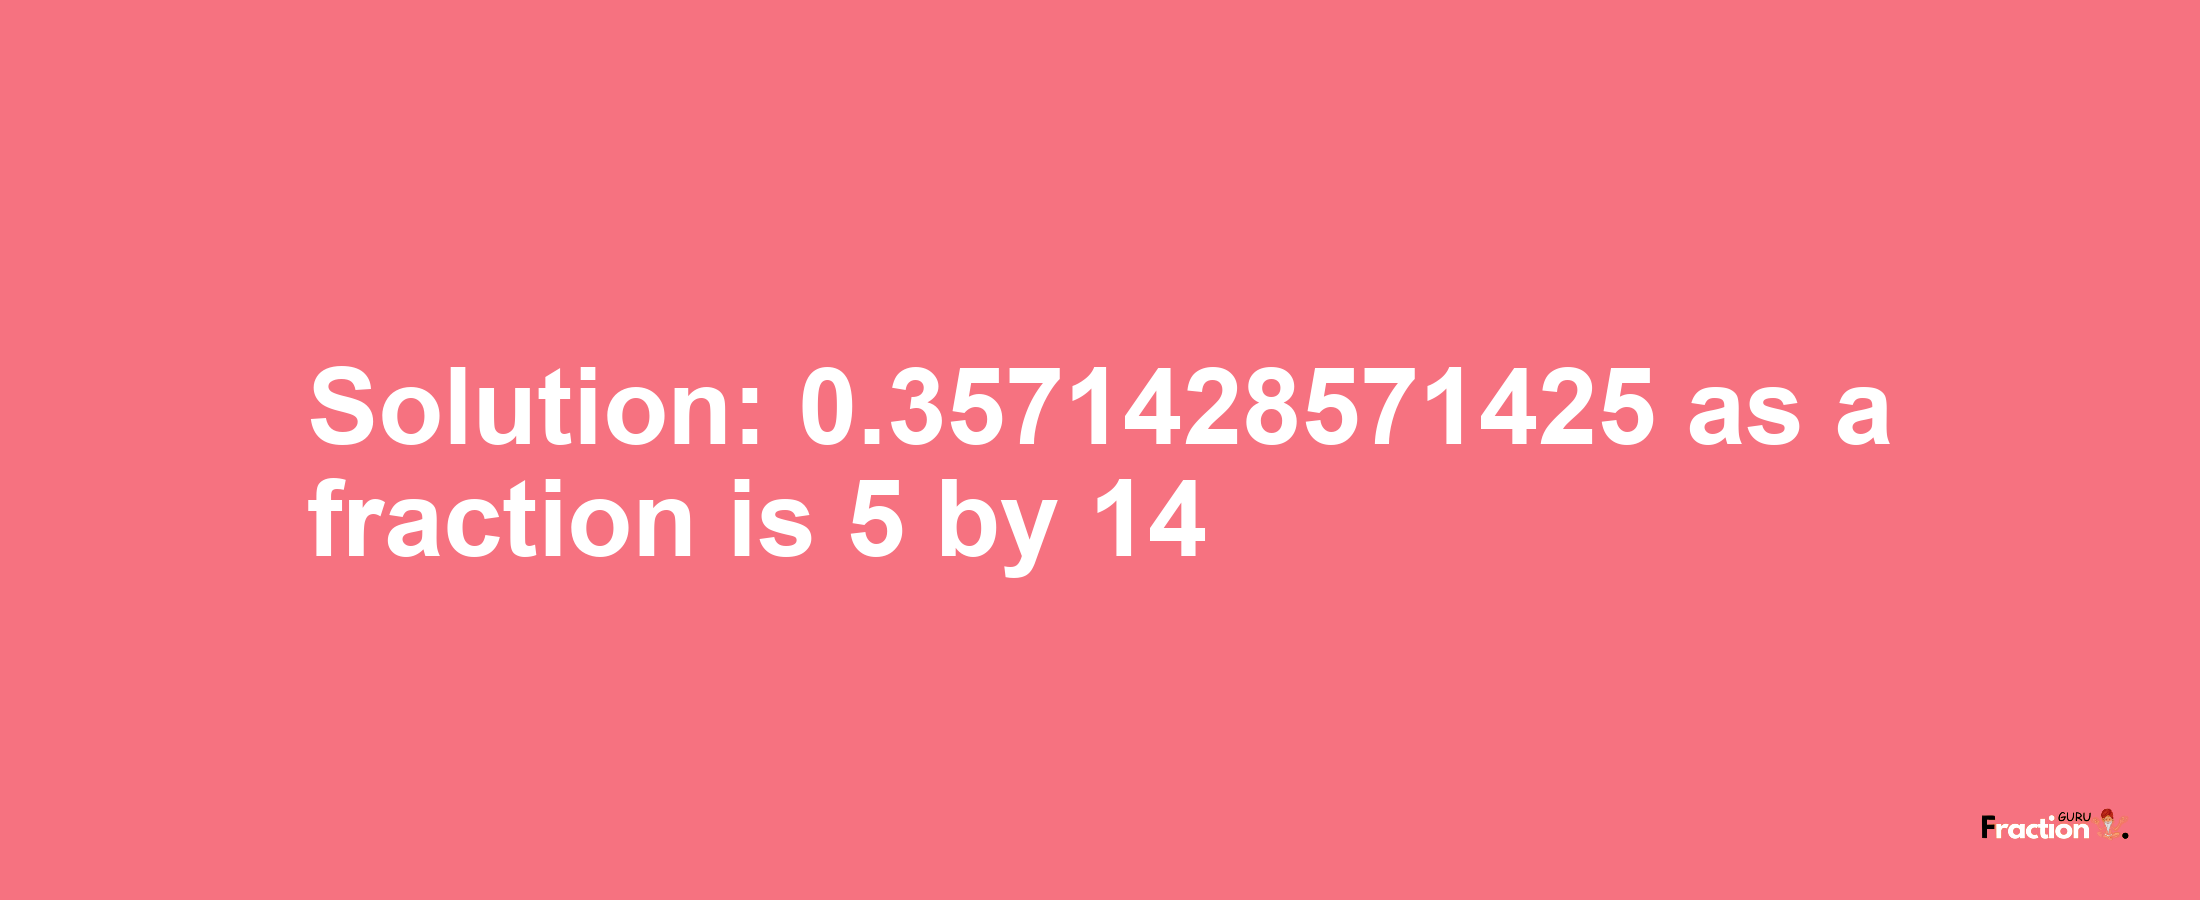 Solution:0.3571428571425 as a fraction is 5/14